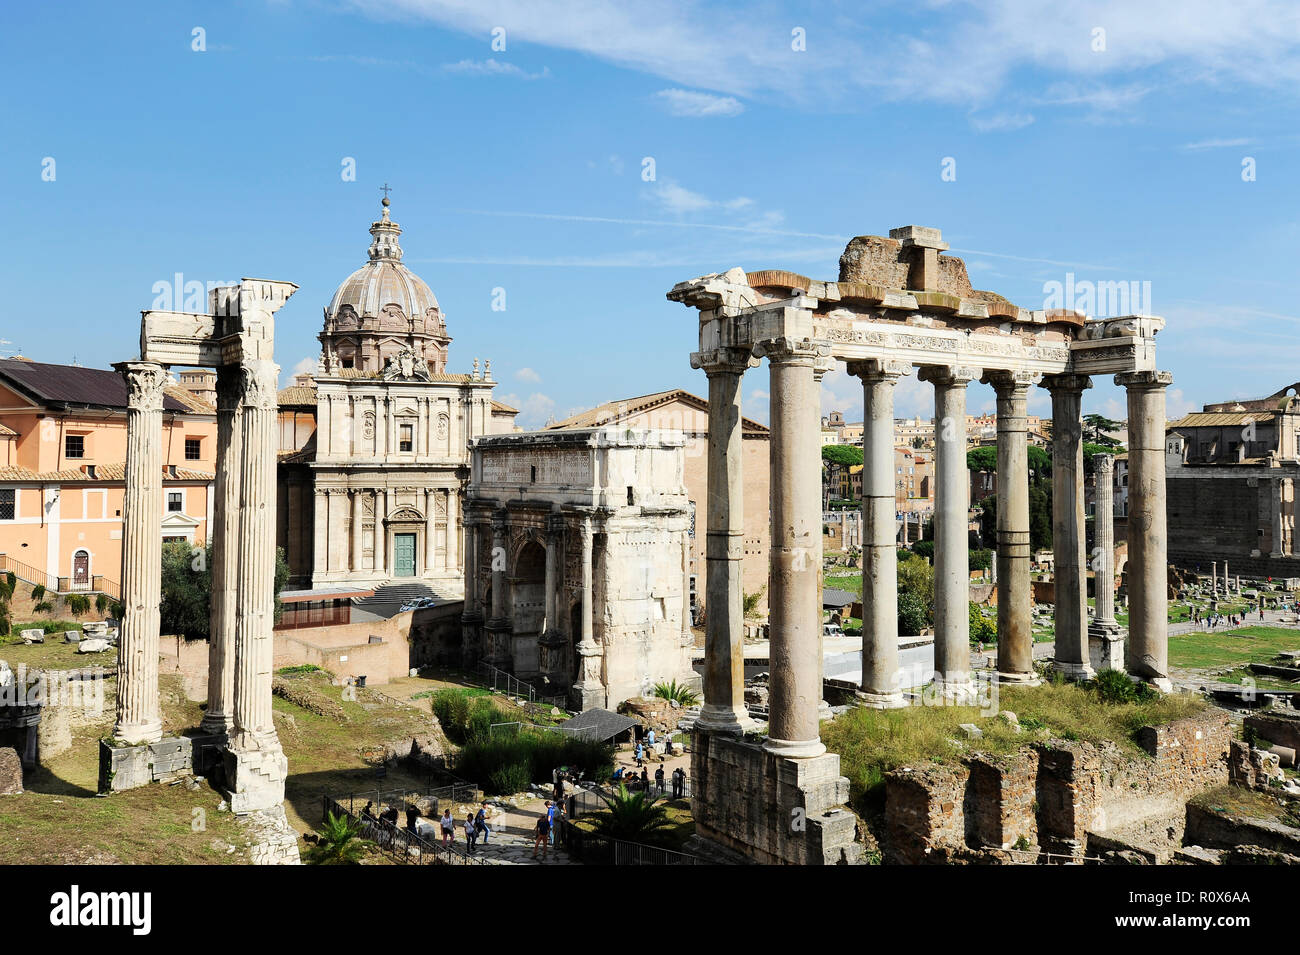 Roman Forum in Rome, Italy, It is one of the main tourist attractions of Rome. Panorama of the famous Roman Forum or Foro Romano in a sunny day. Ancie Stock Photo